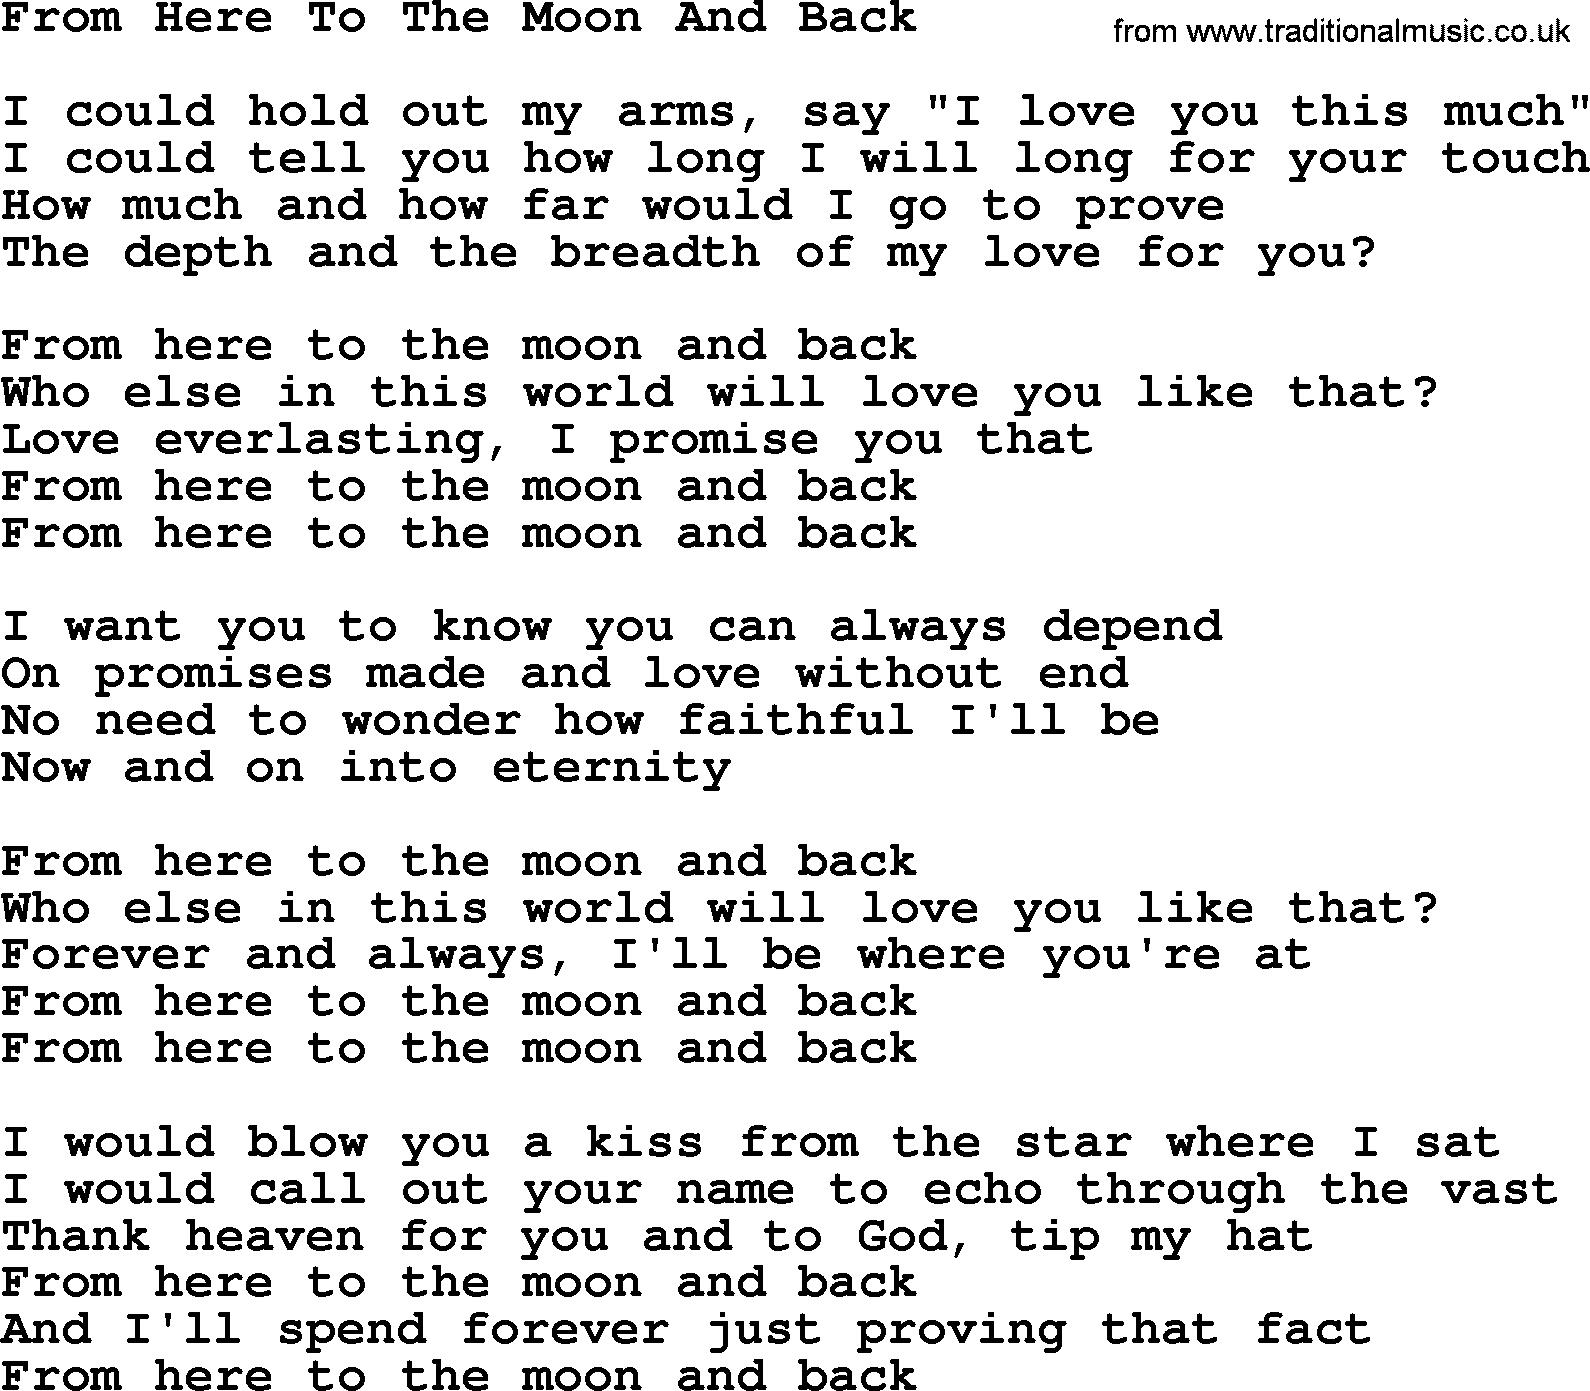 Willie Nelson song: From Here To The Moon And Back lyrics